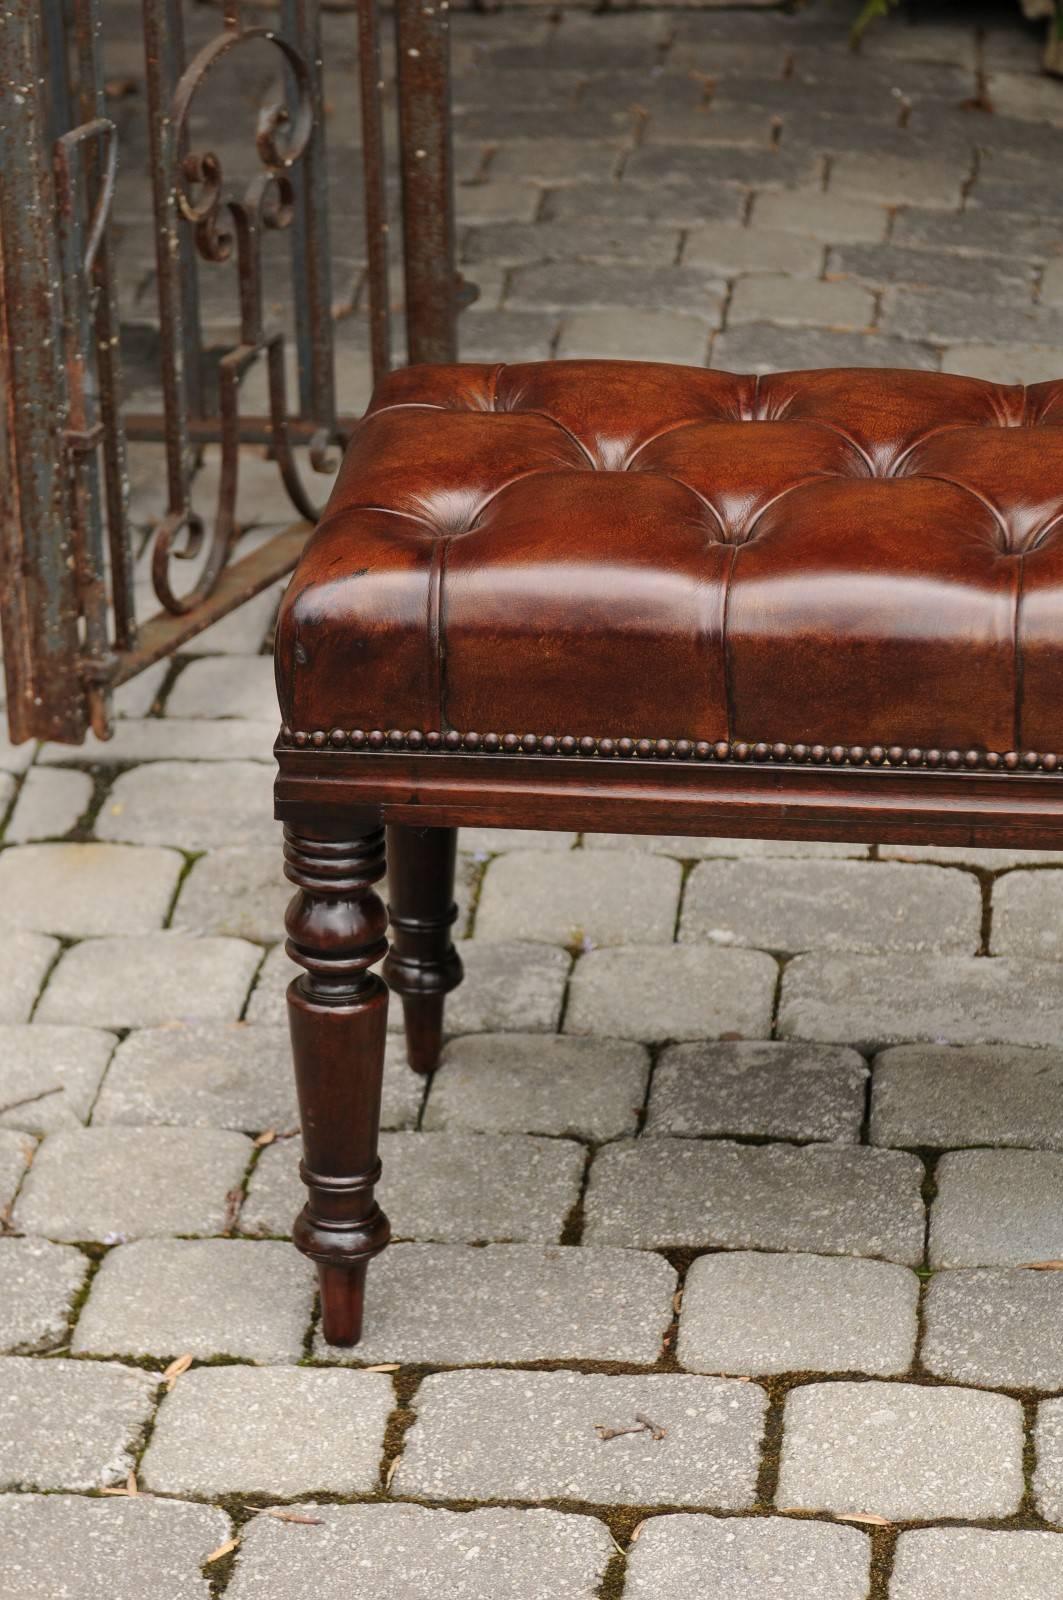 19th Century English Tufted Leather and Mahogany Backless Bench from the 1870s